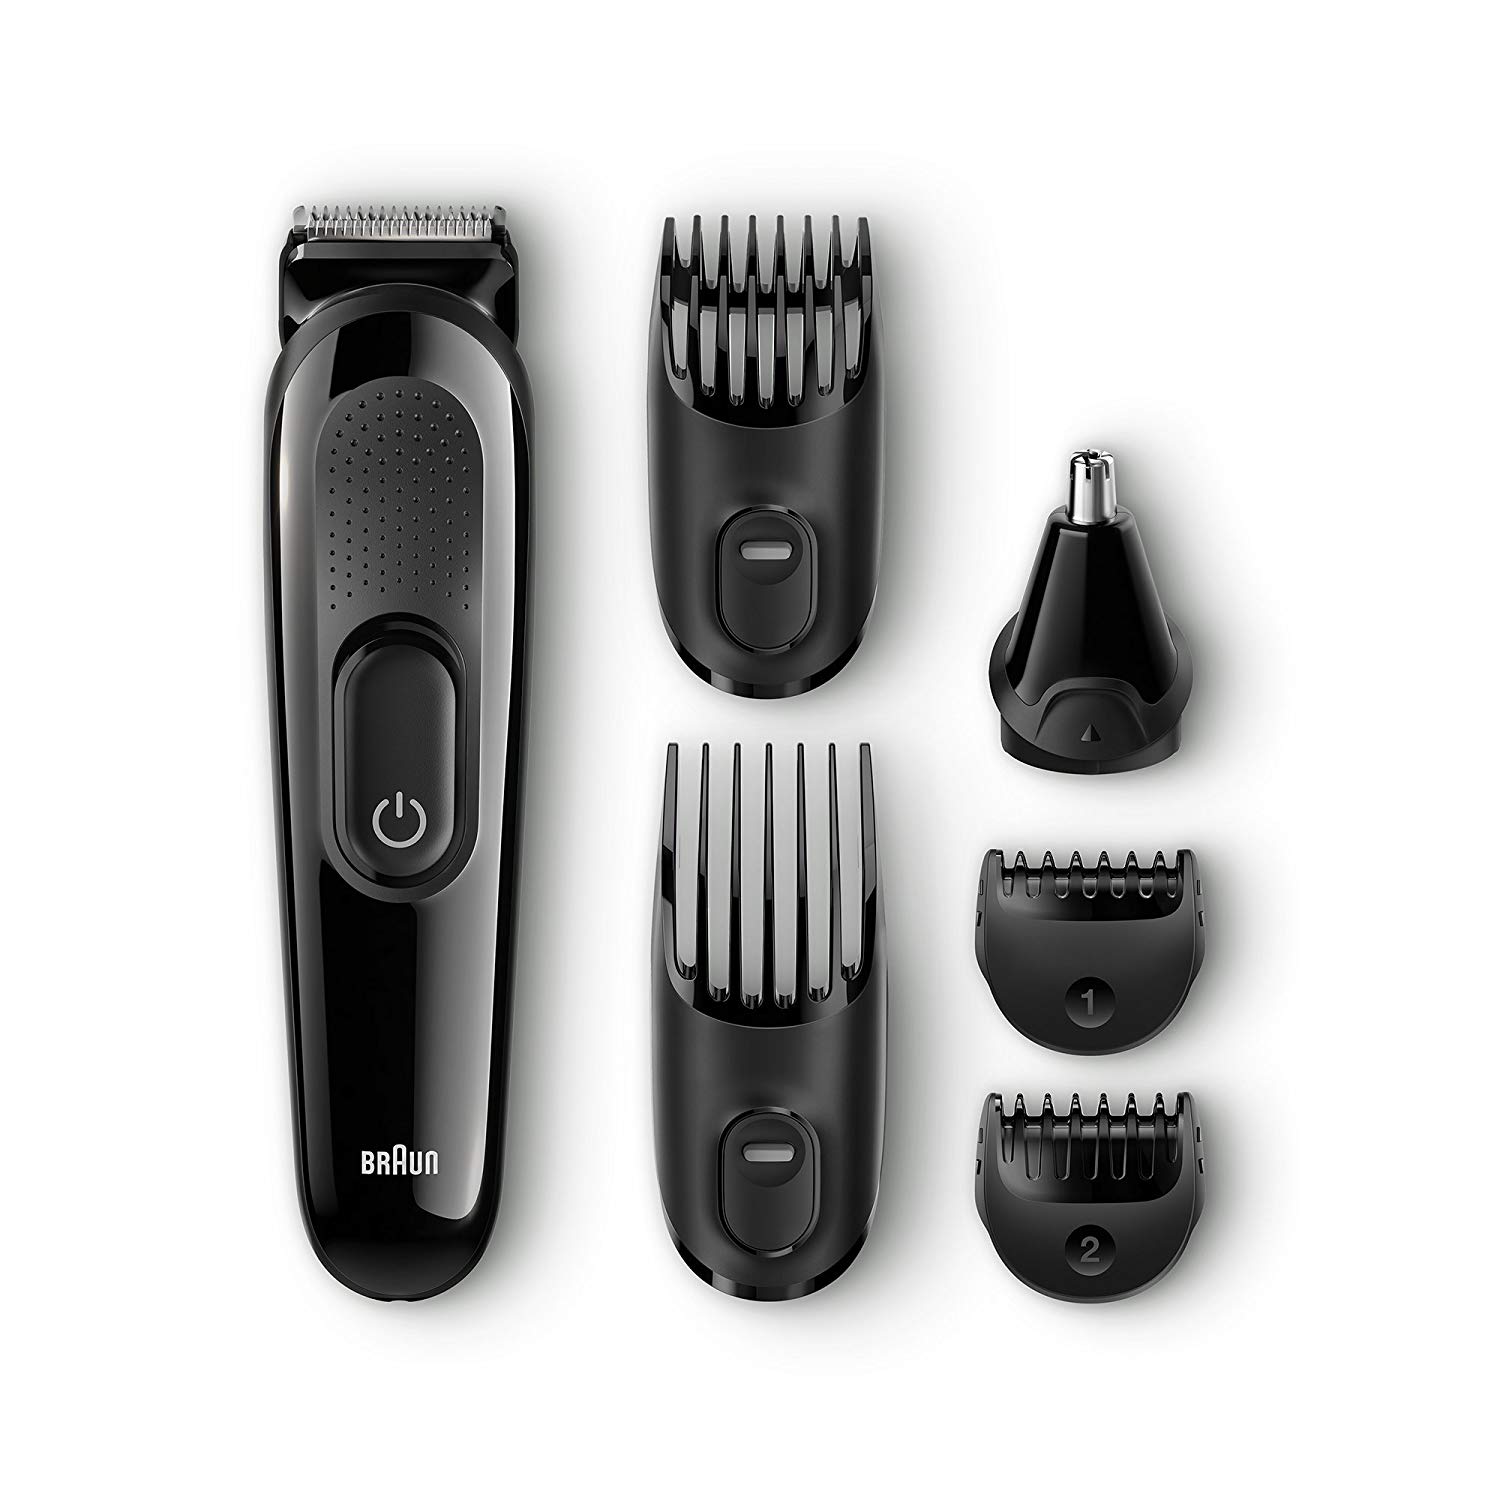 Braun Multi Grooming Kit MGK3020 6-in-1 Precision Trimmer for Beard and Hair Clippers